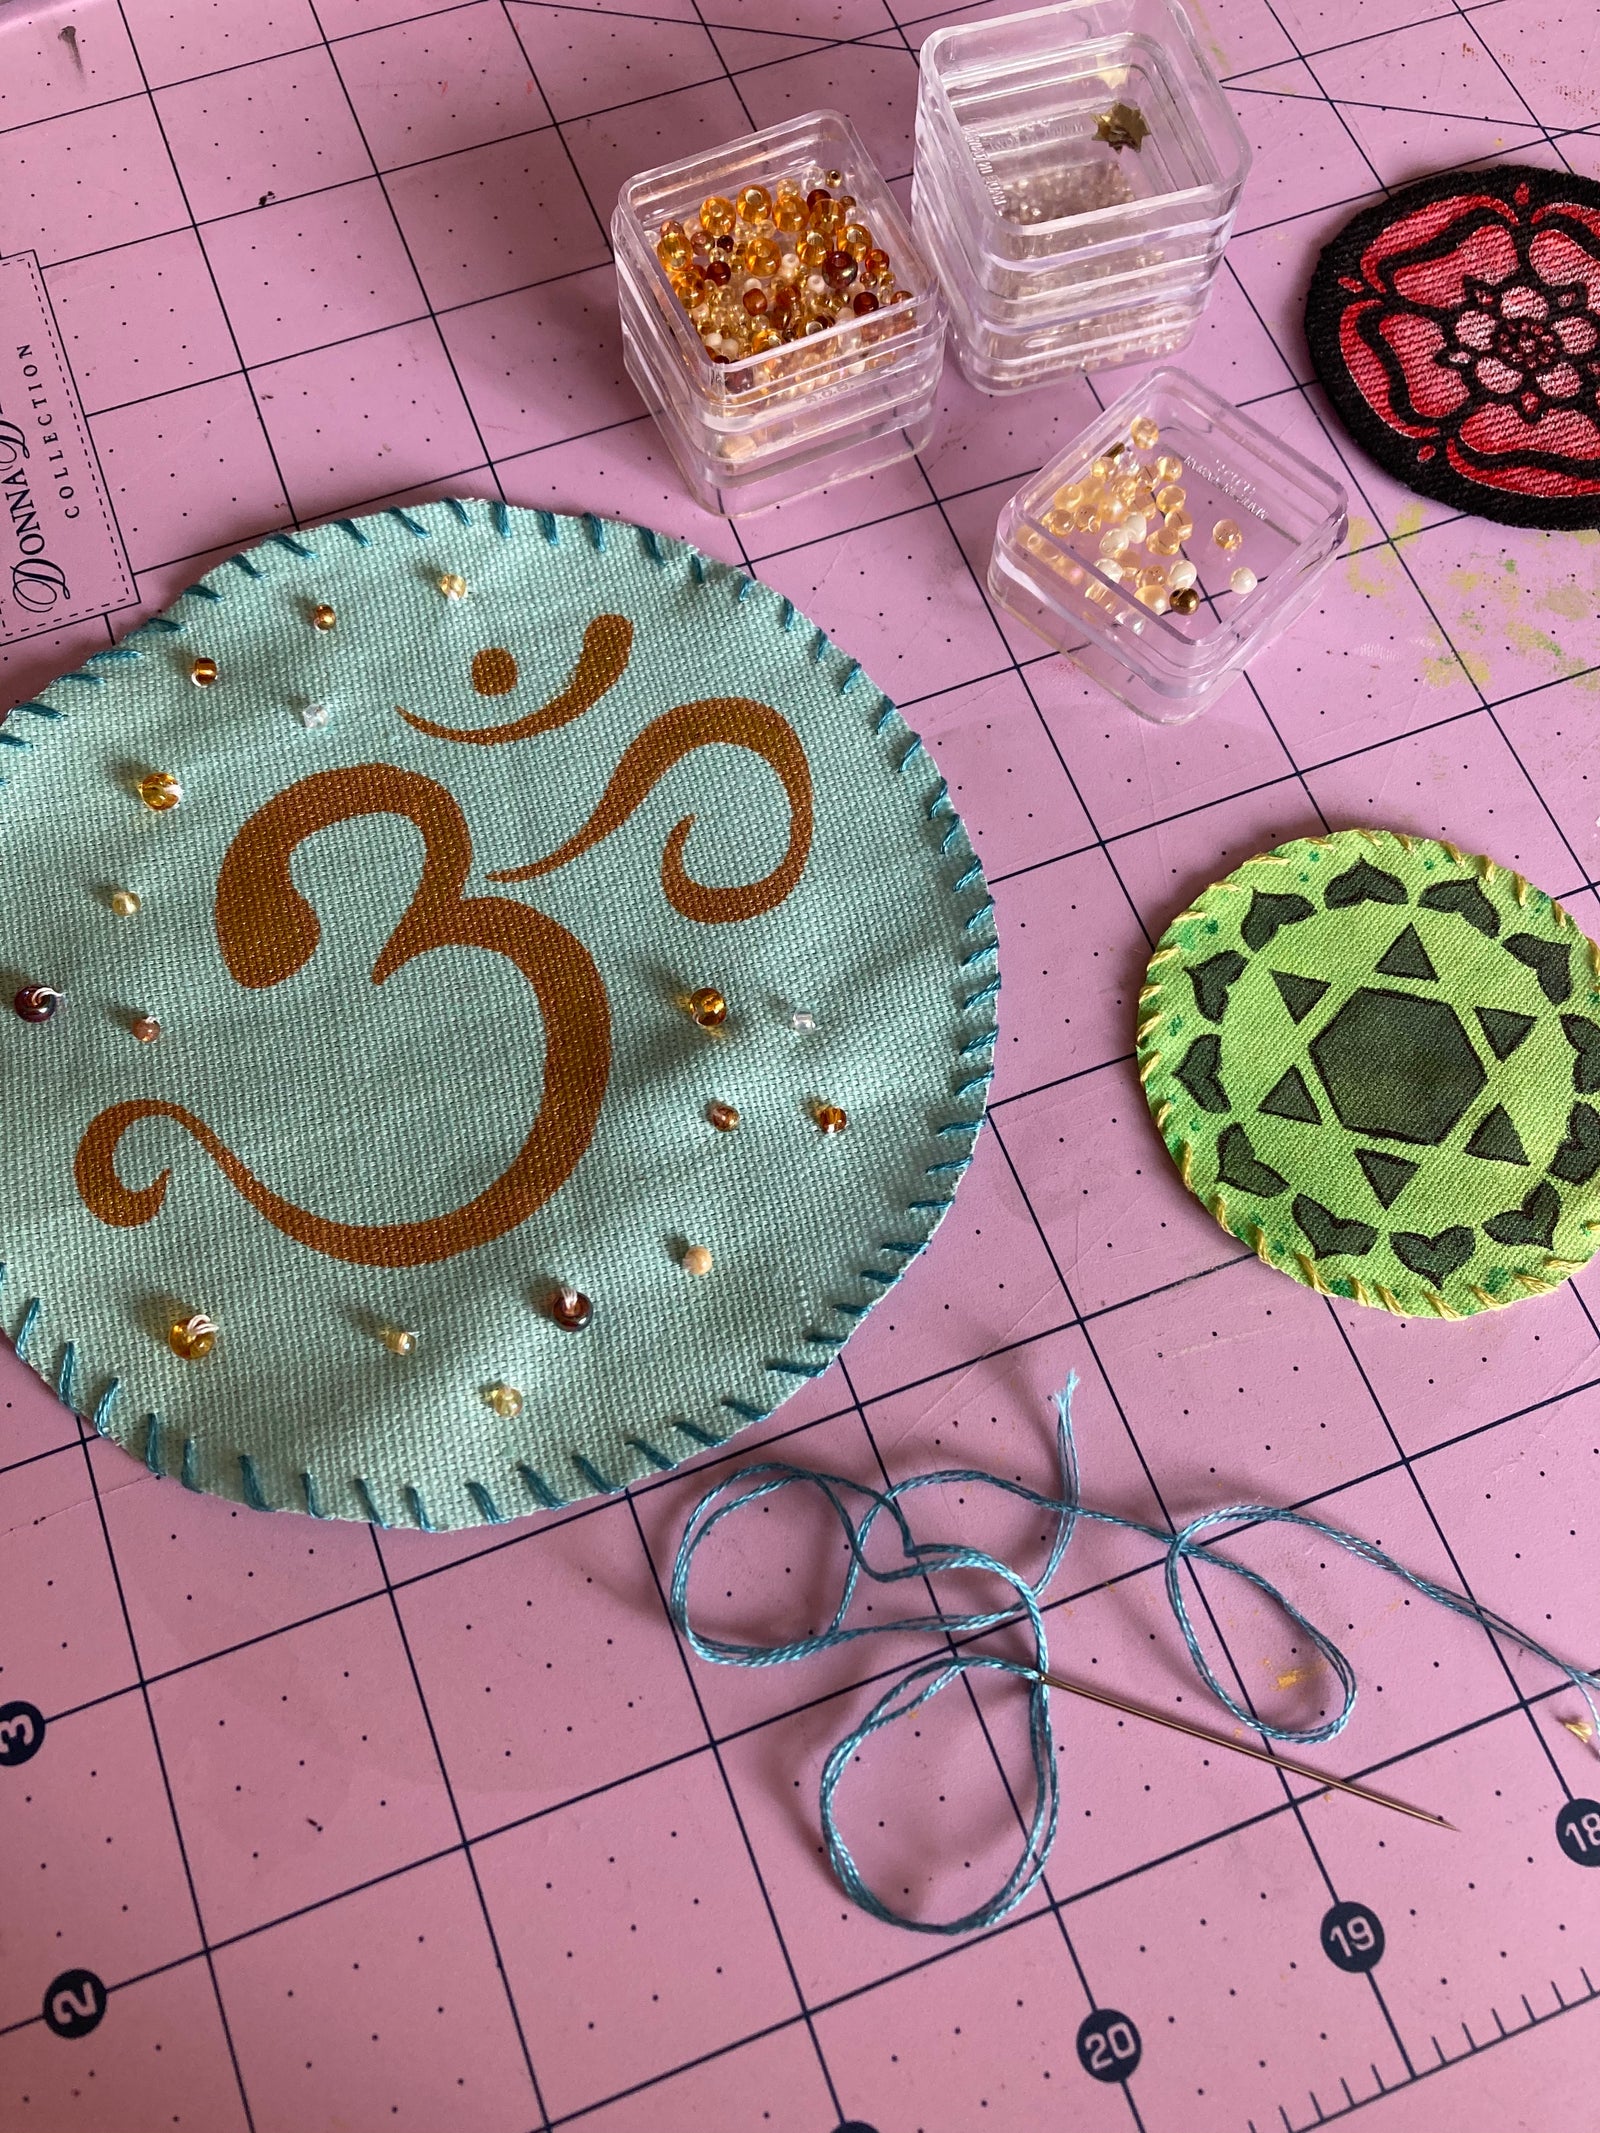 Making fabric patches - Artistcellar